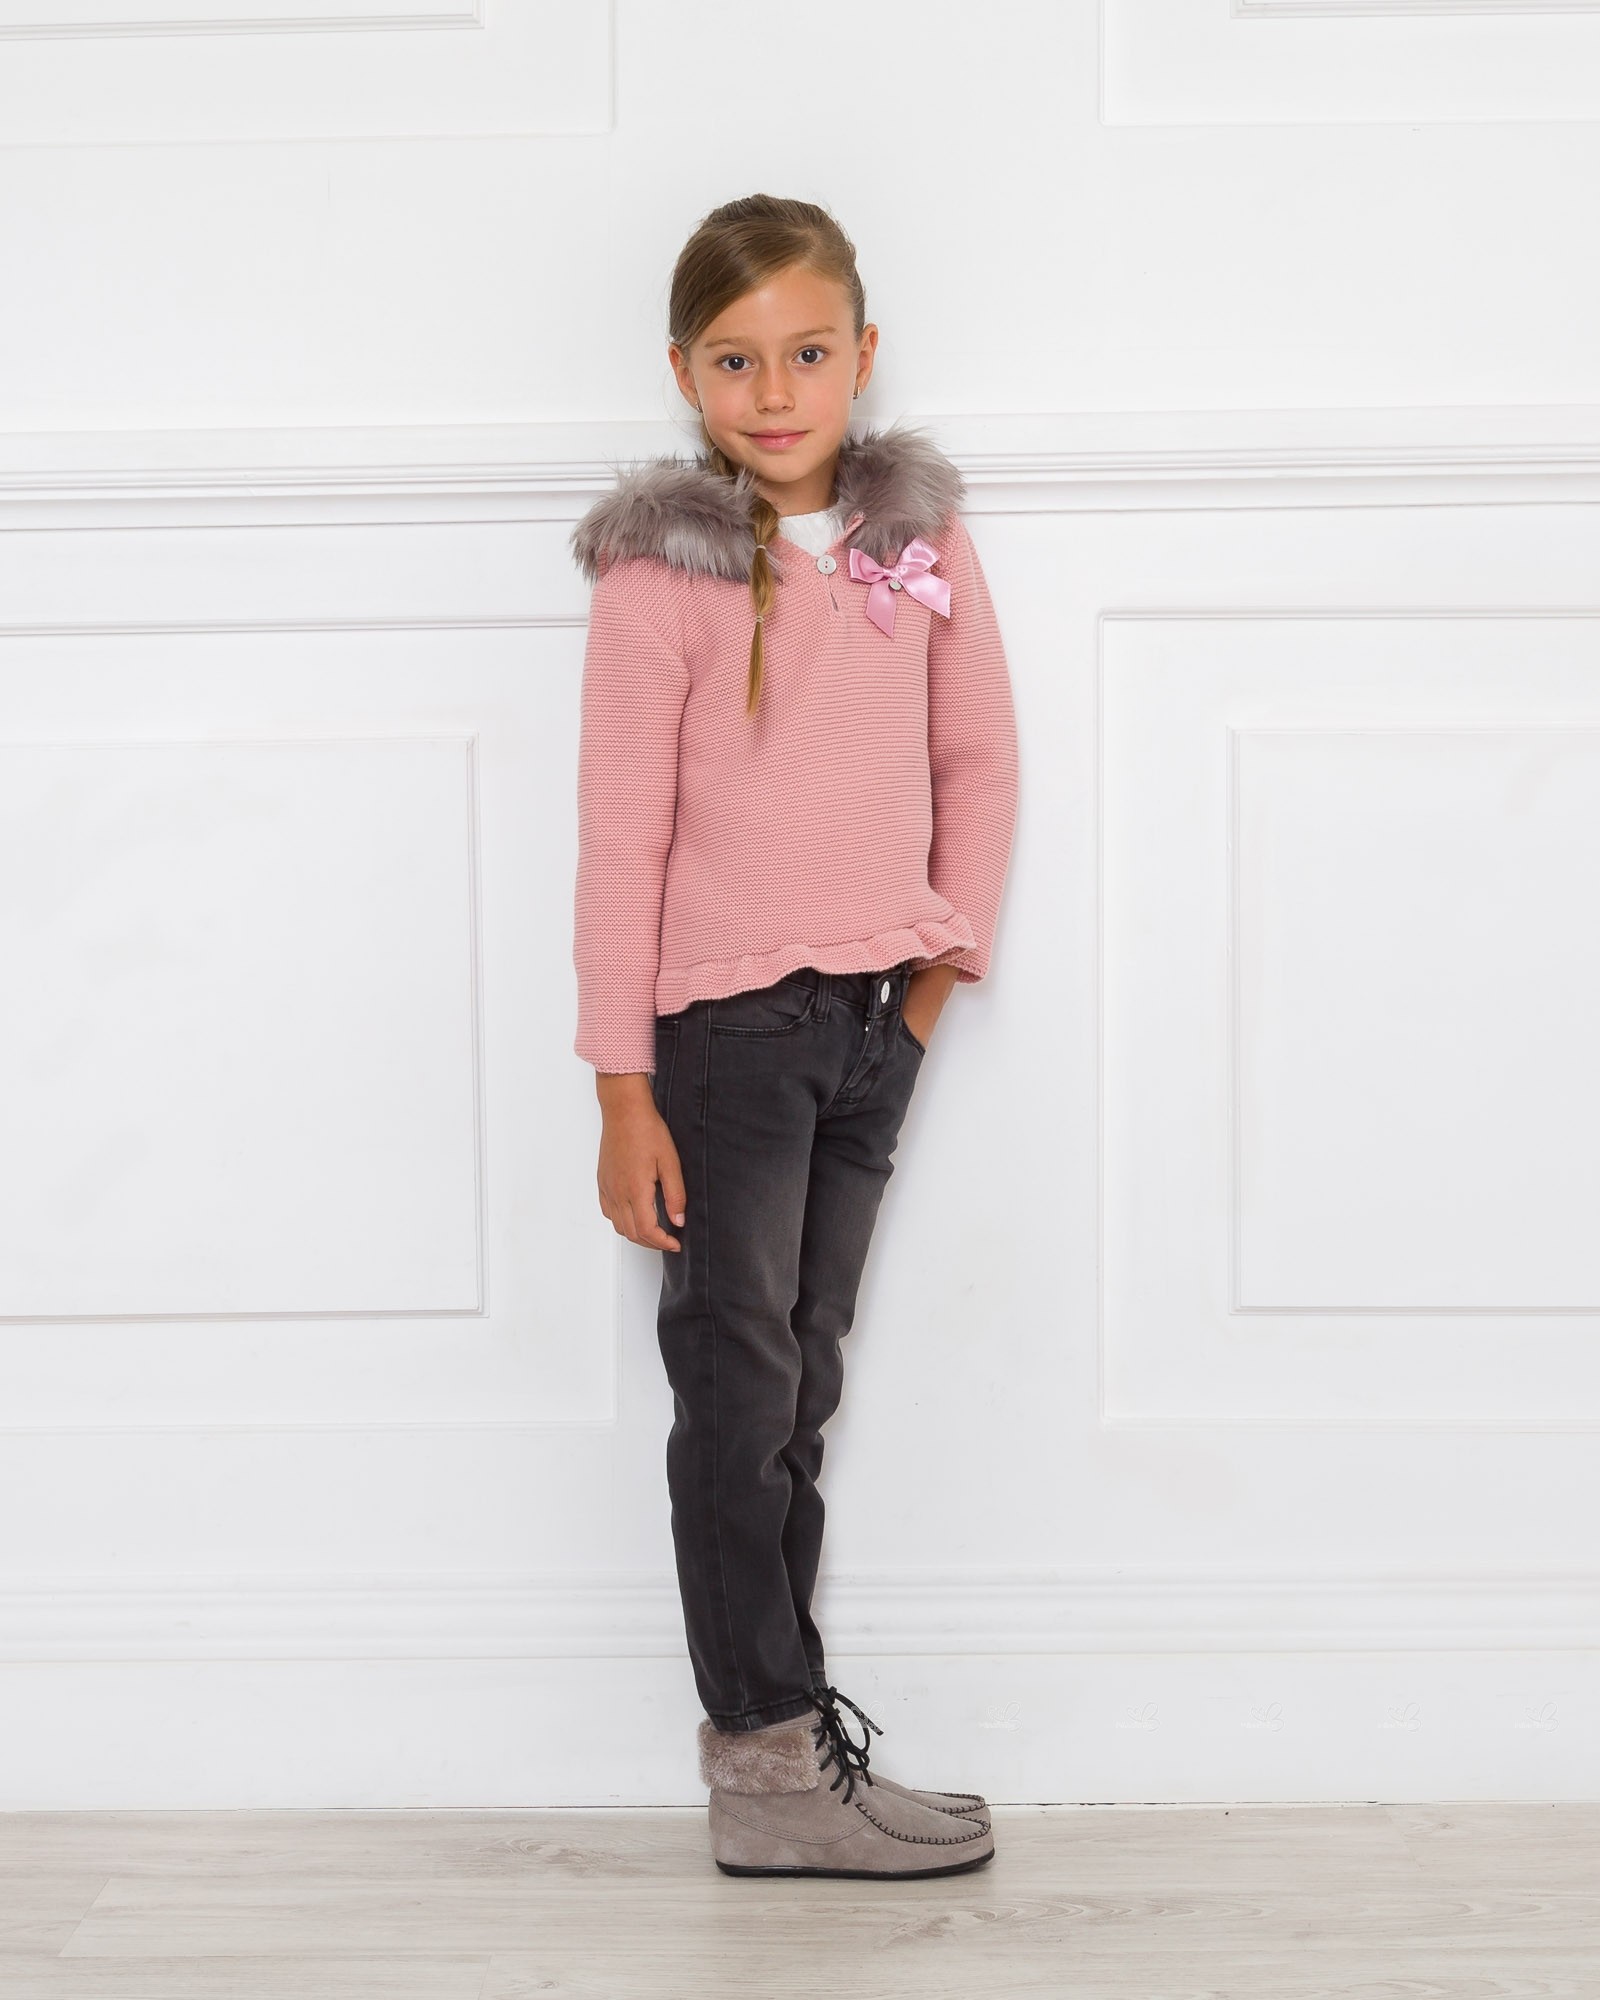 Blush Pink Knitted Sweater With Synthetic Fur Hood & Satin Bow | Missbaby